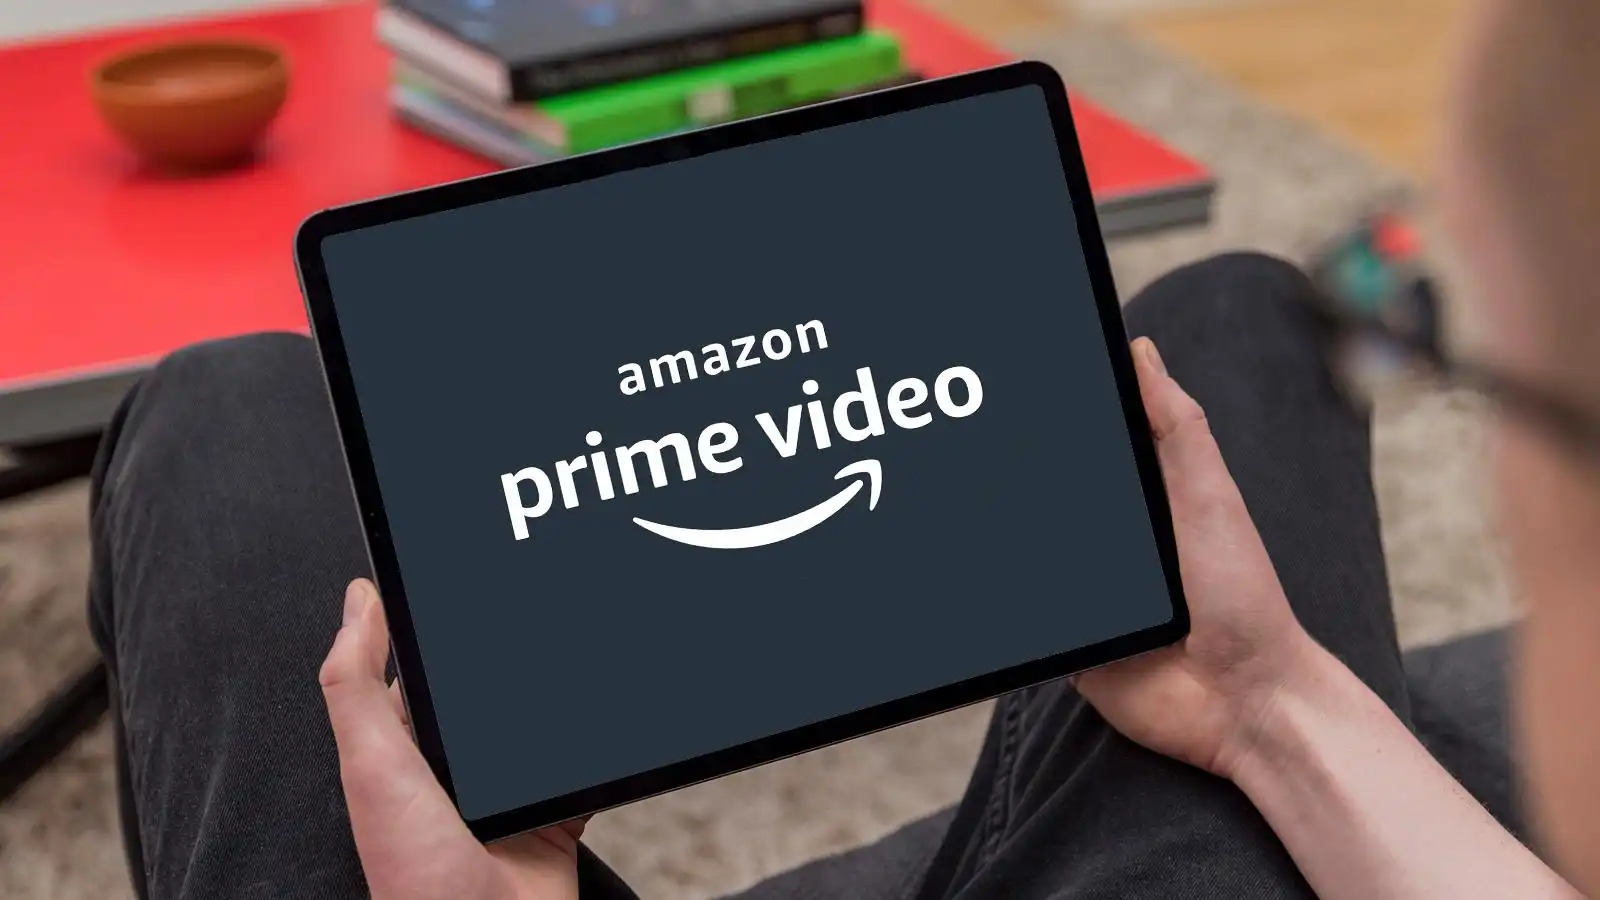 How To Get Amazon Prime Video On Tablet